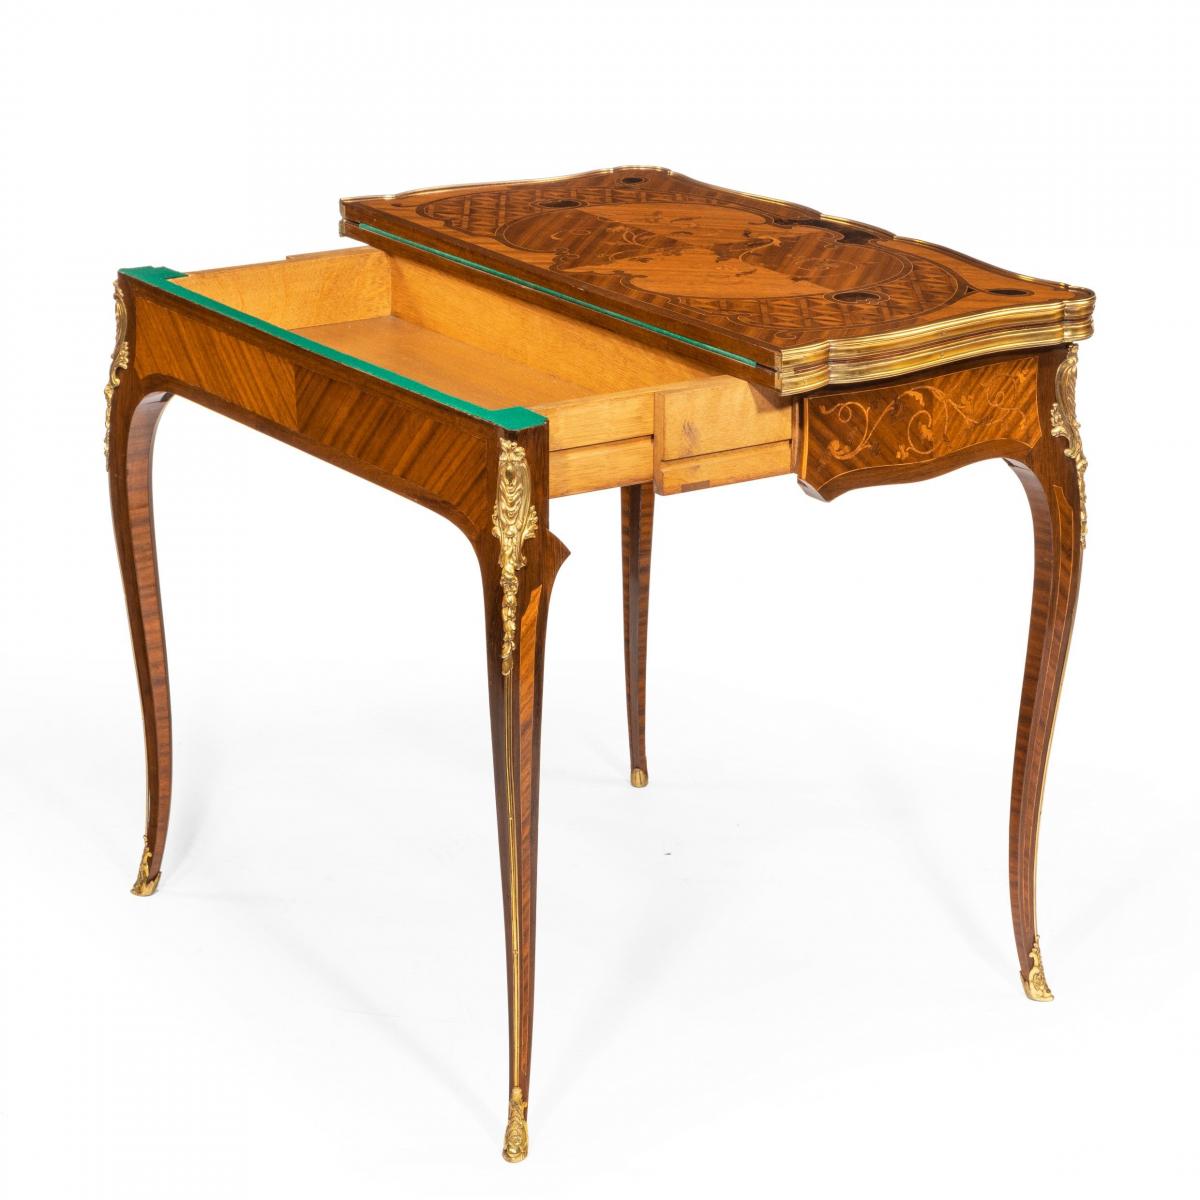 A pair of kingwood card tables by G. Durand